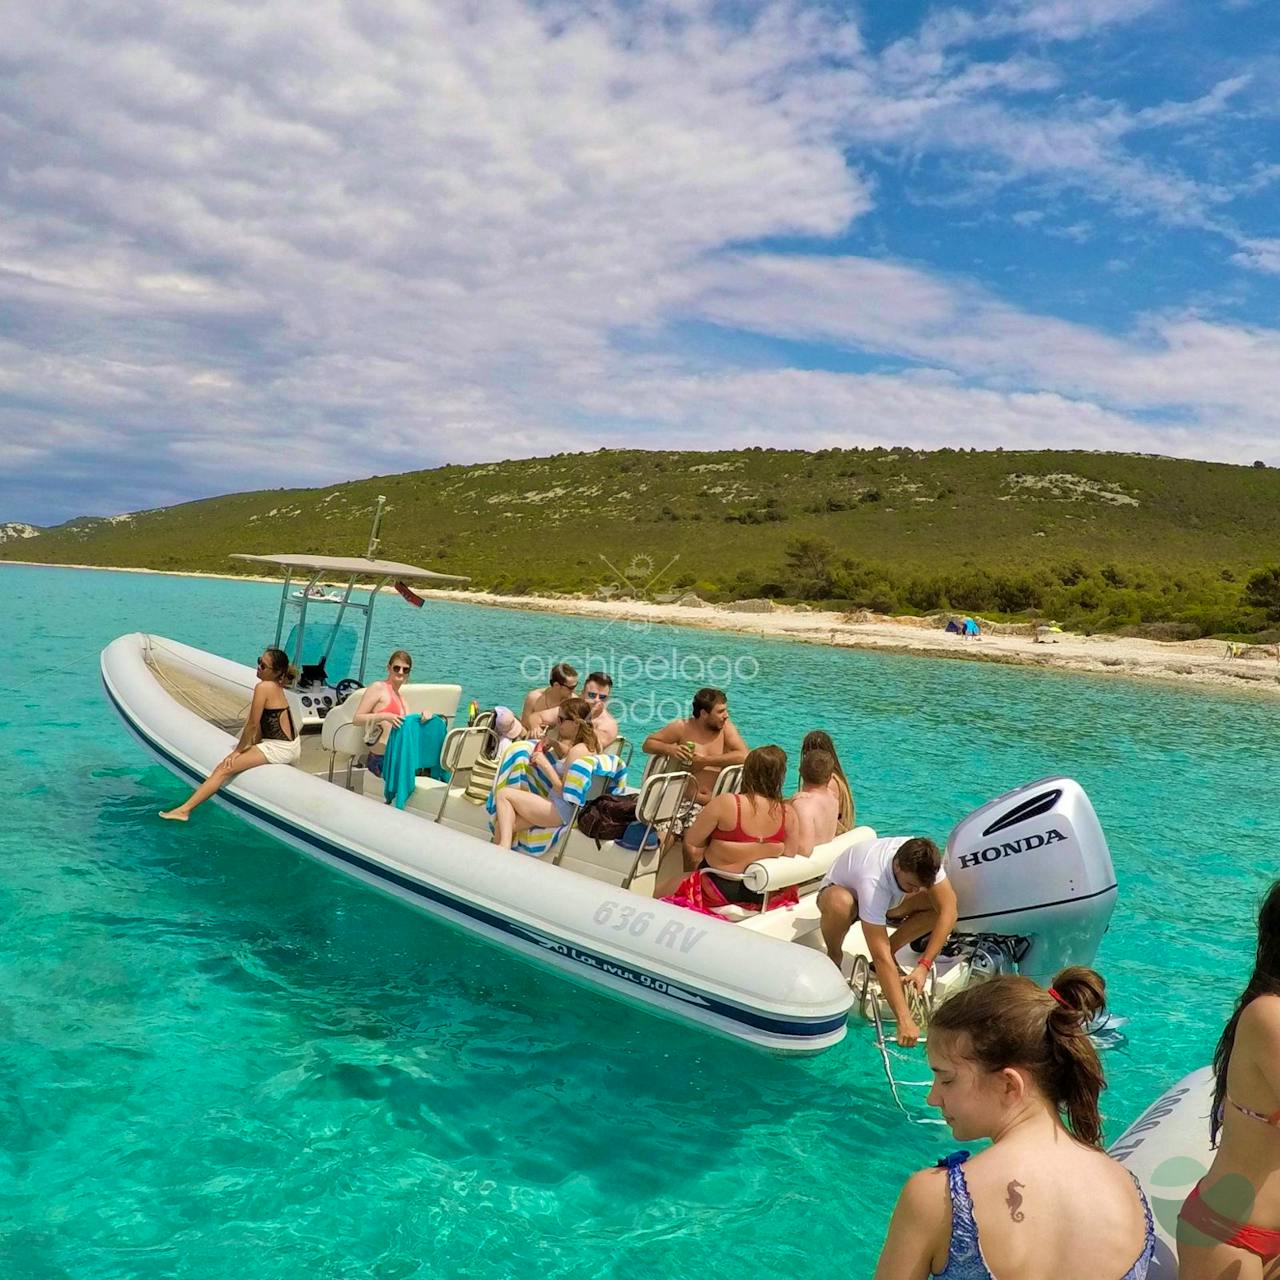 Half-day private boat tour from Zadar to Sakarun beach